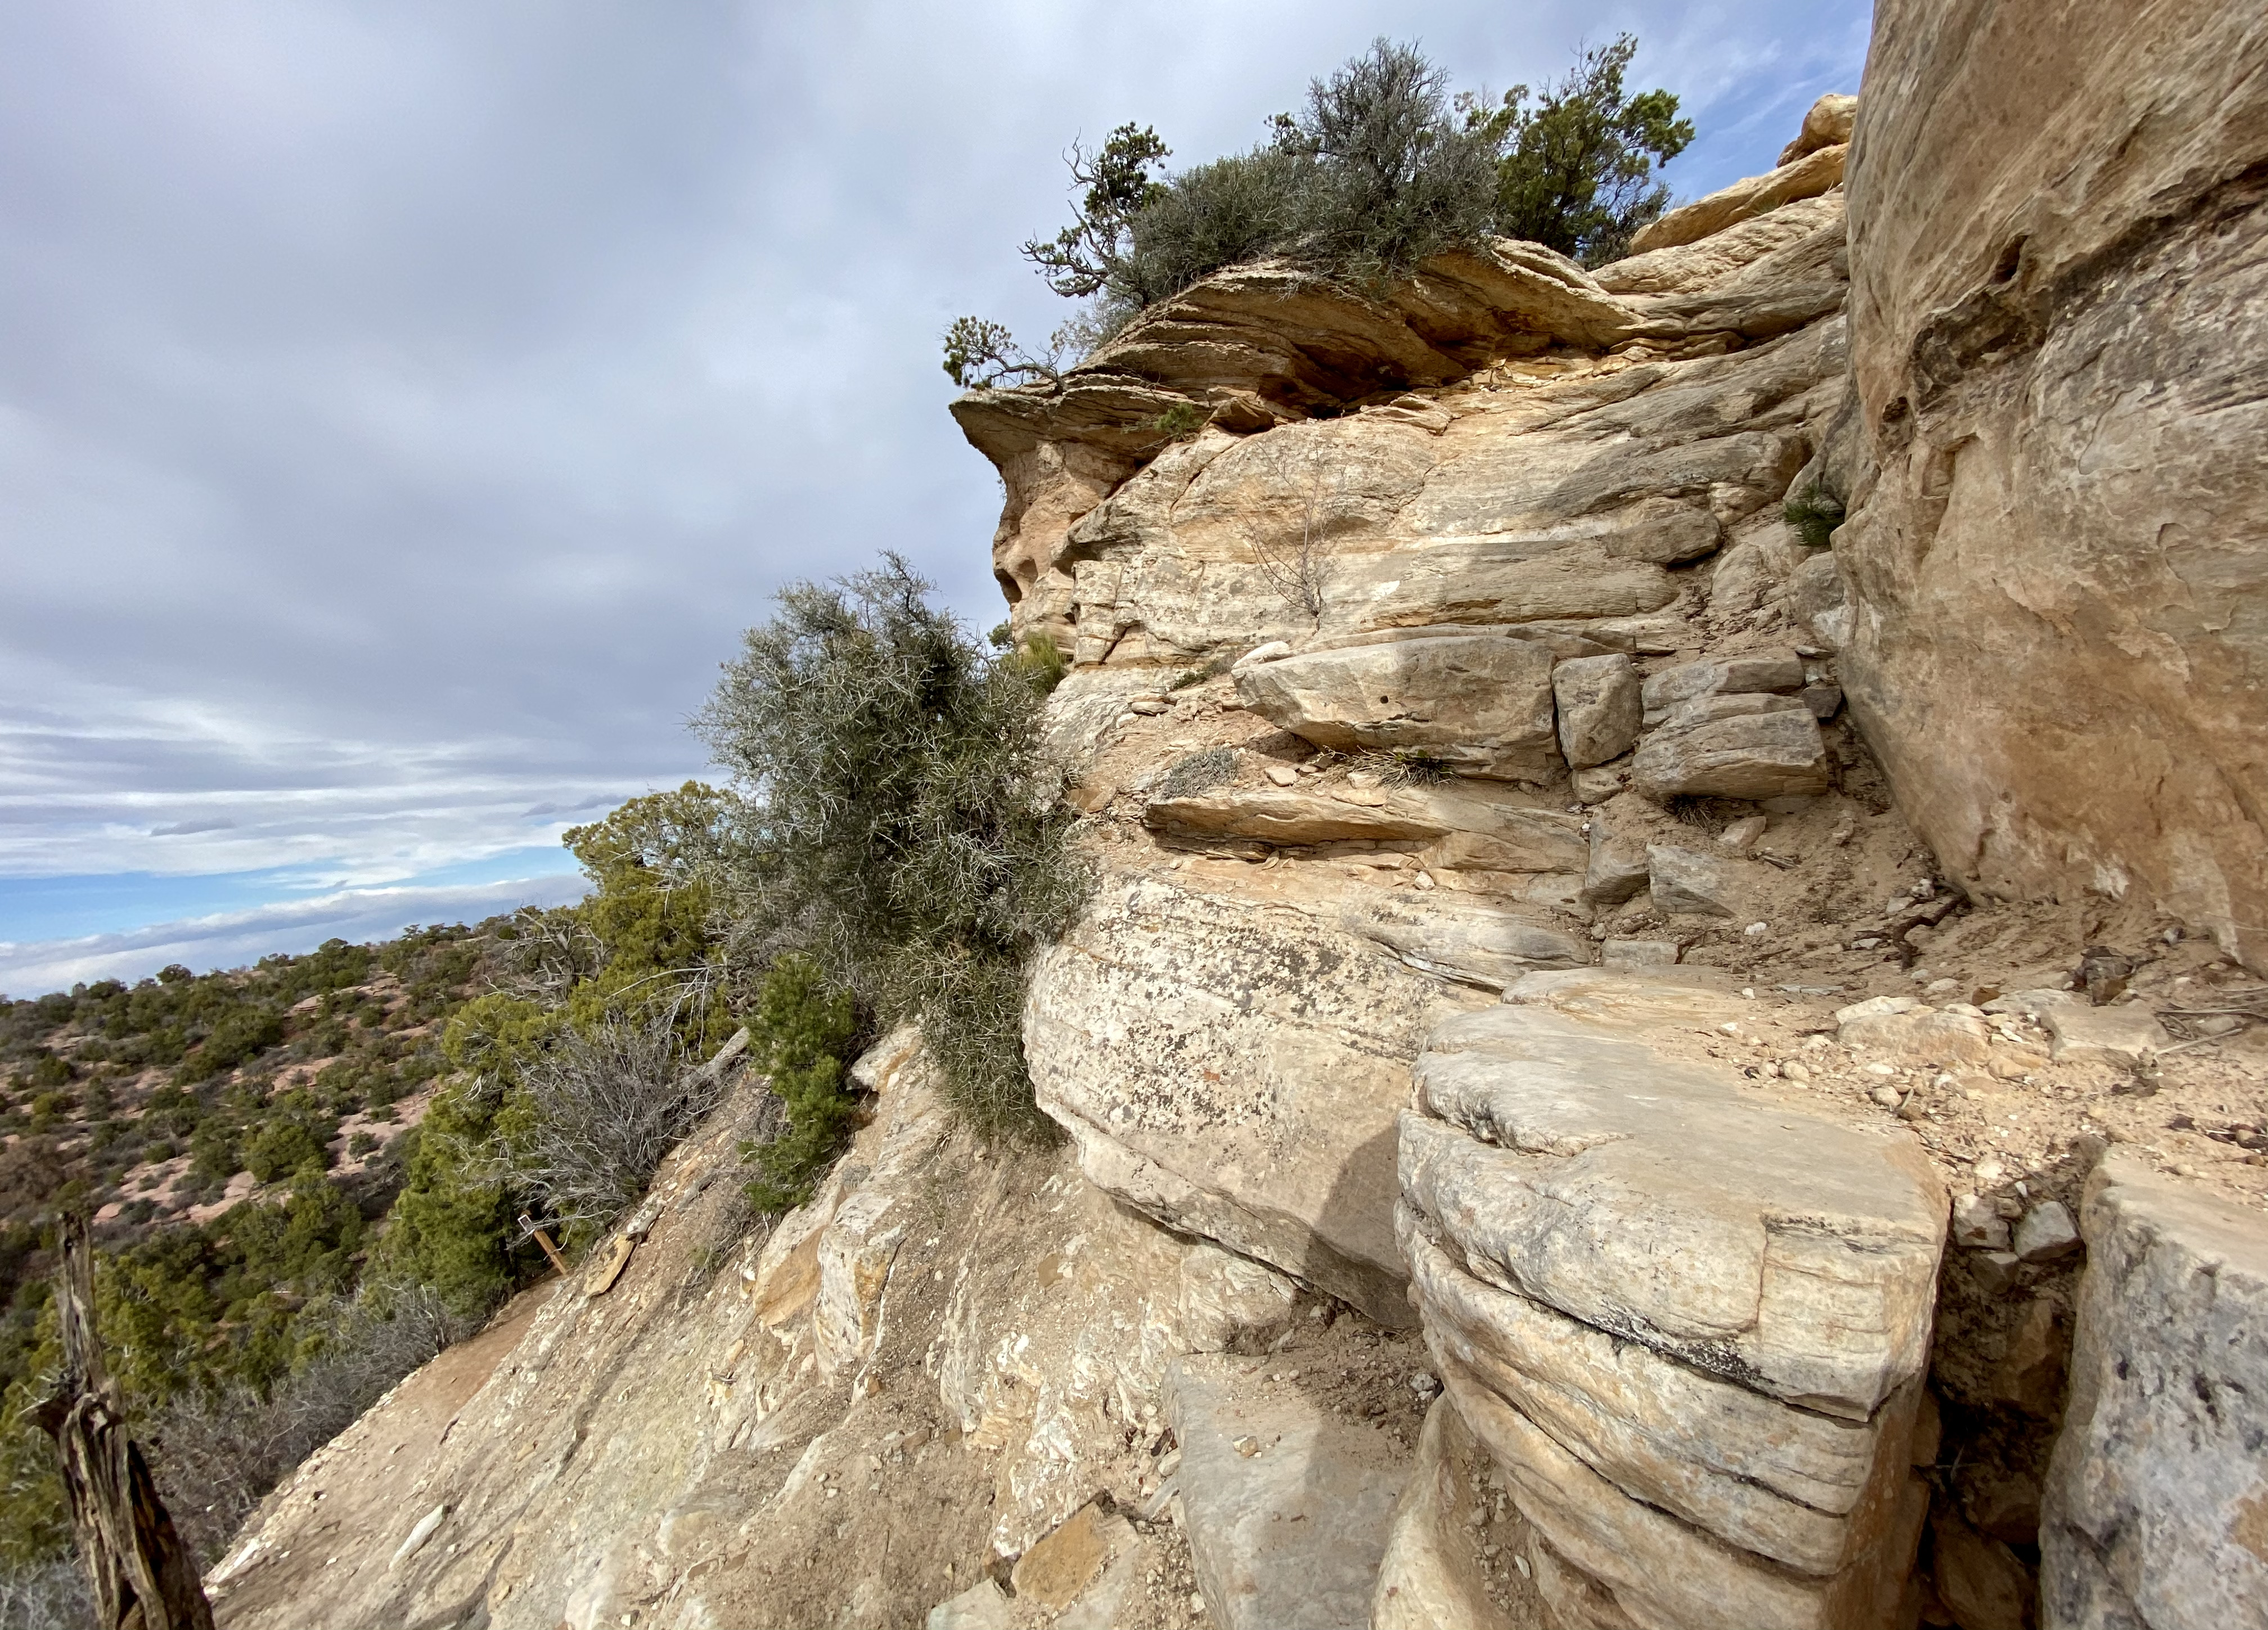 a wide-angle photo from halfway down the Notch, a steep and rock downhill portion of the Whole Enchilada